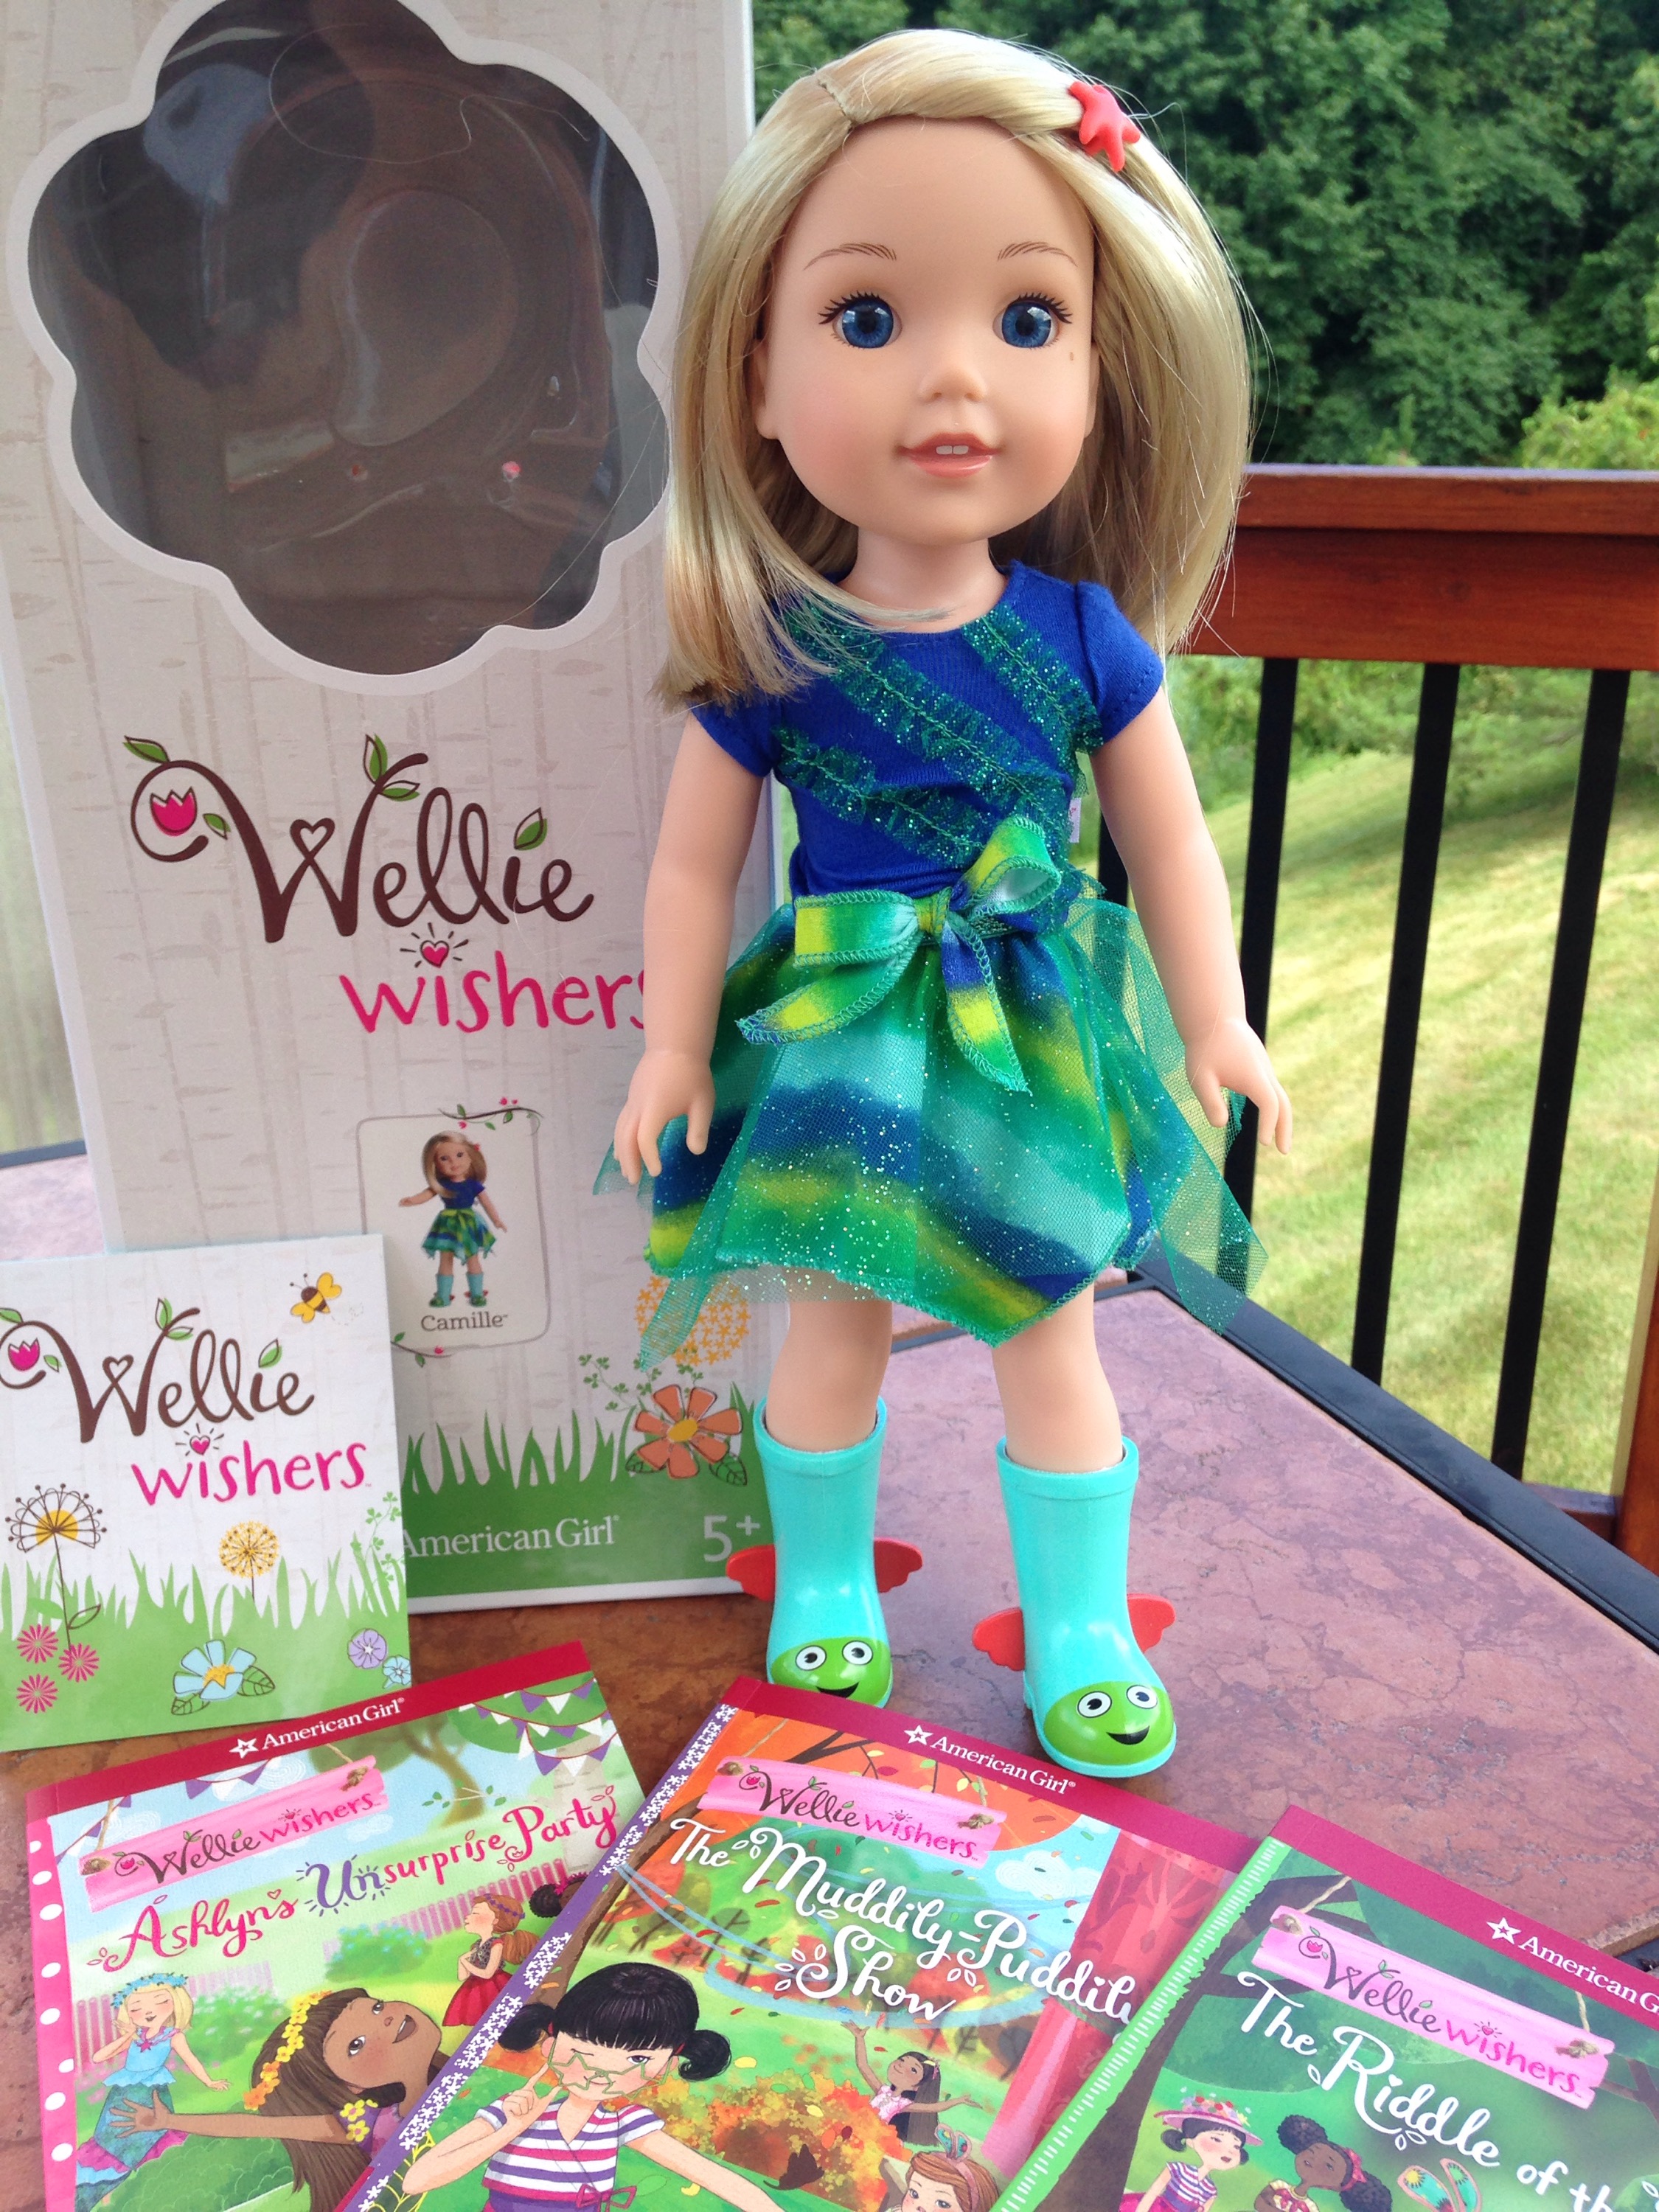 american girl doll wellie wishers camille